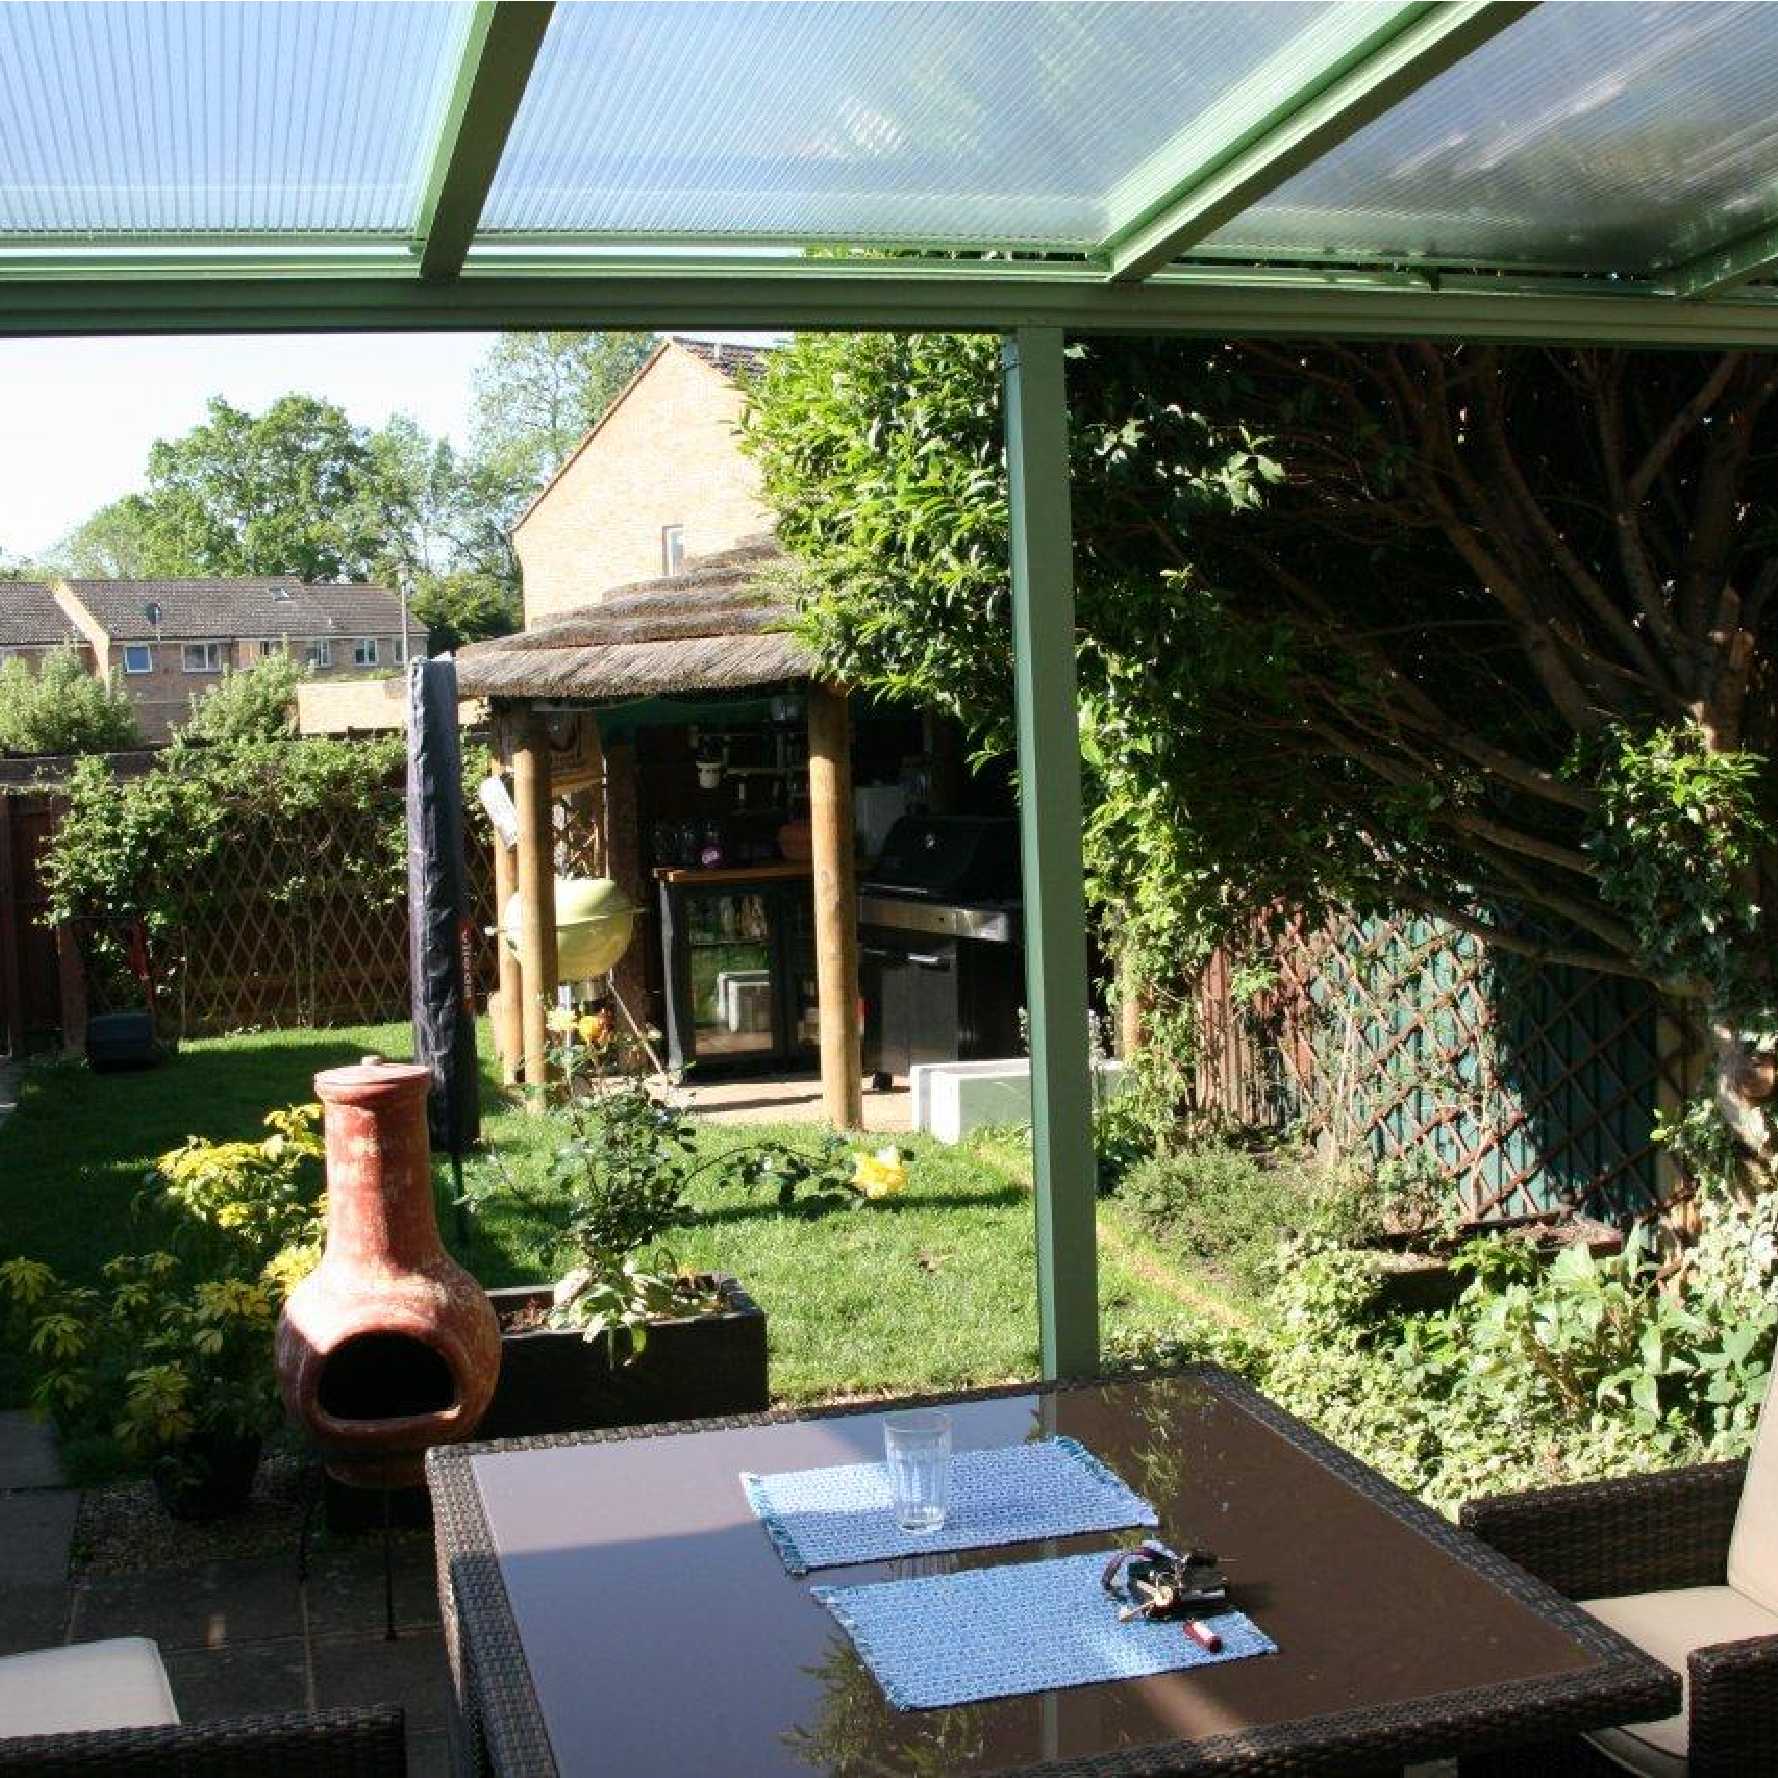 Affordable Omega Smart Lean-To Canopy, White with 16mm Polycarbonate Glazing - 3.1m (W) x 3.0m (P), (2) Supporting Posts